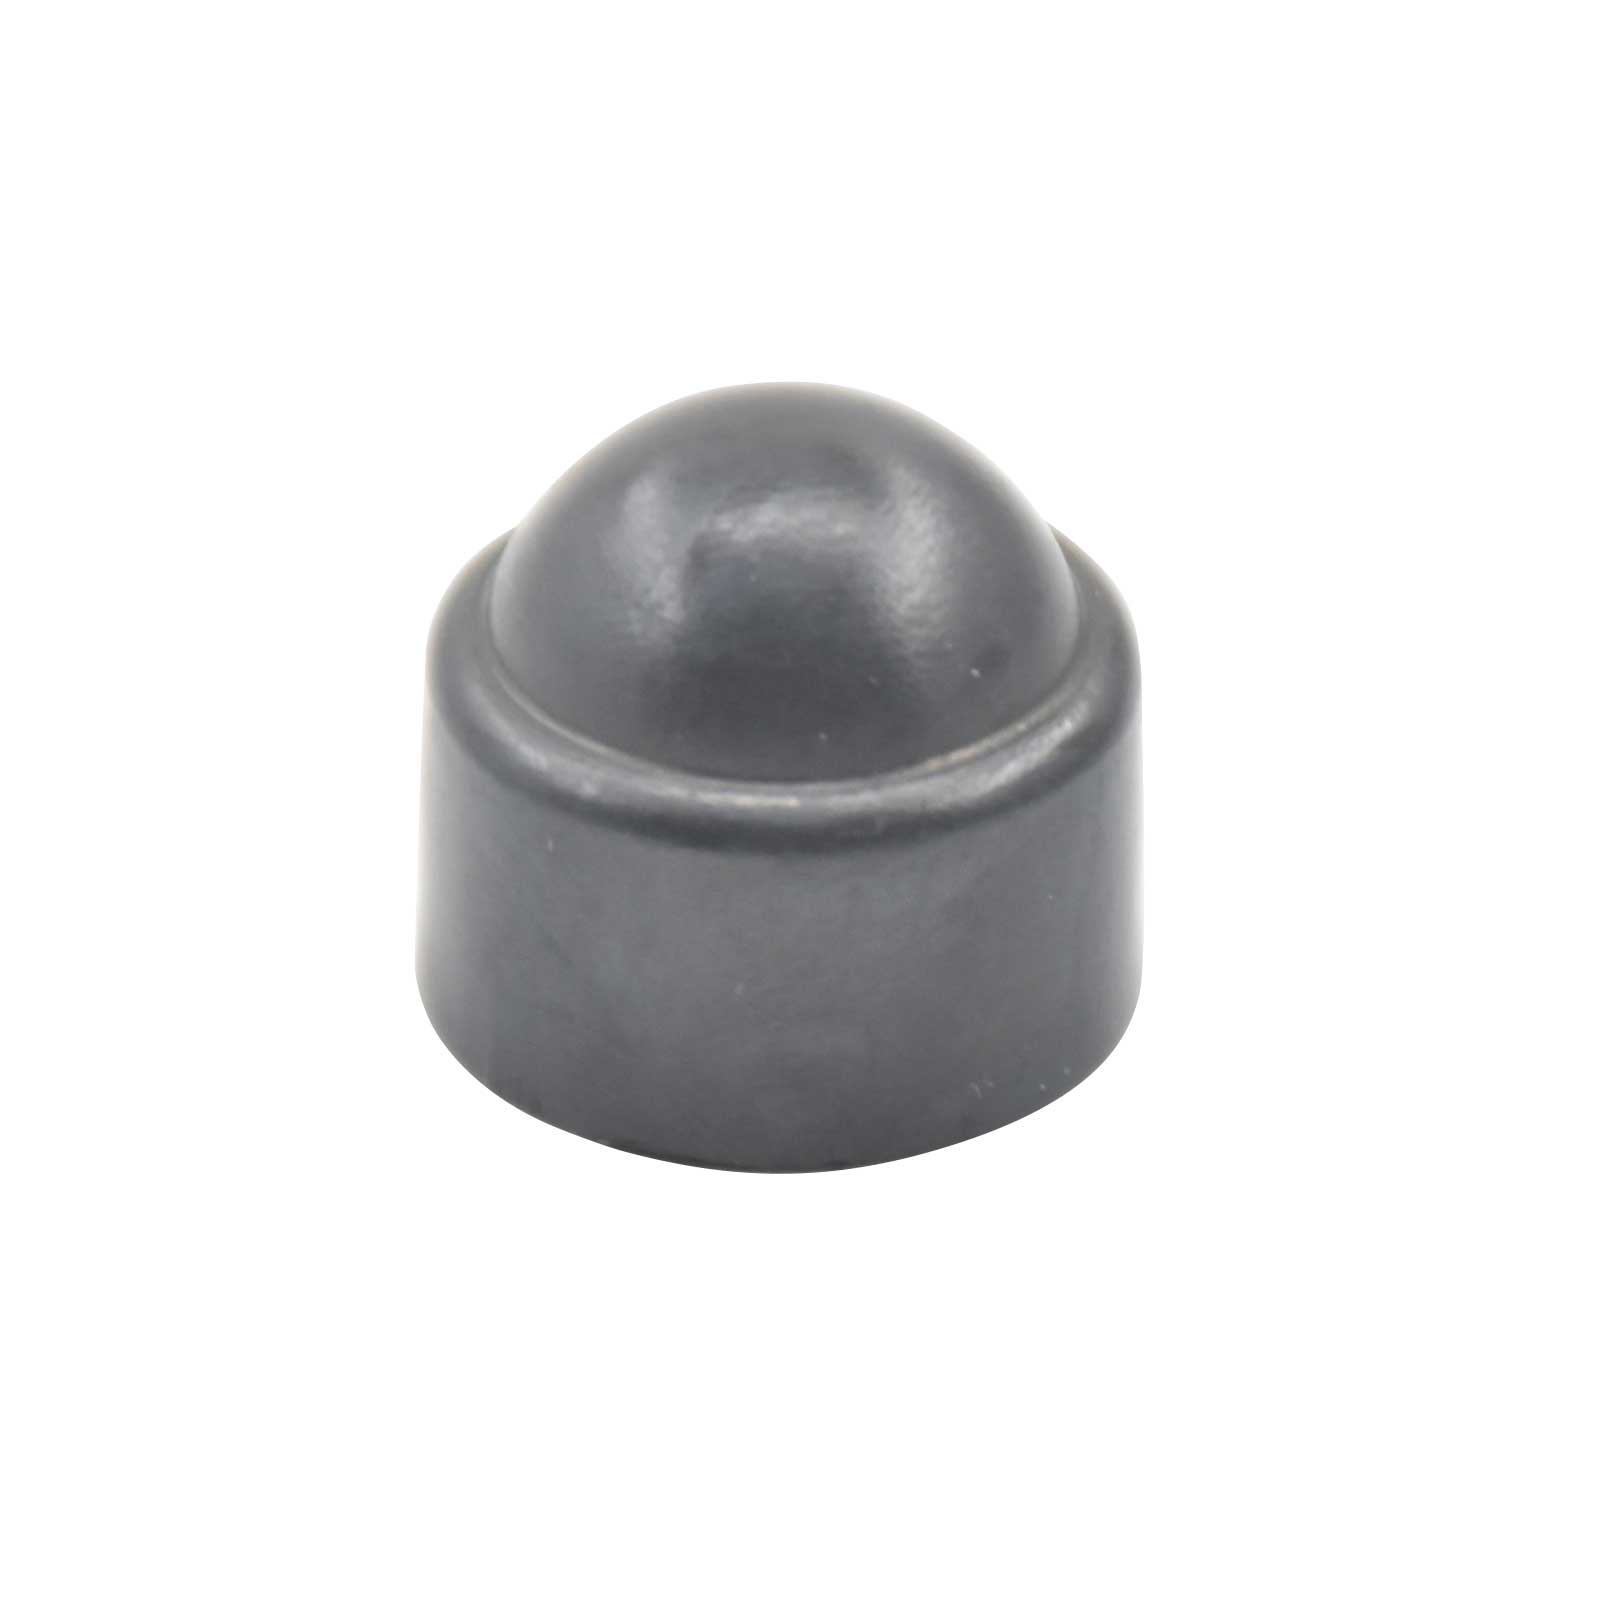 Plastic Cap For Bolts & Nuts - M10